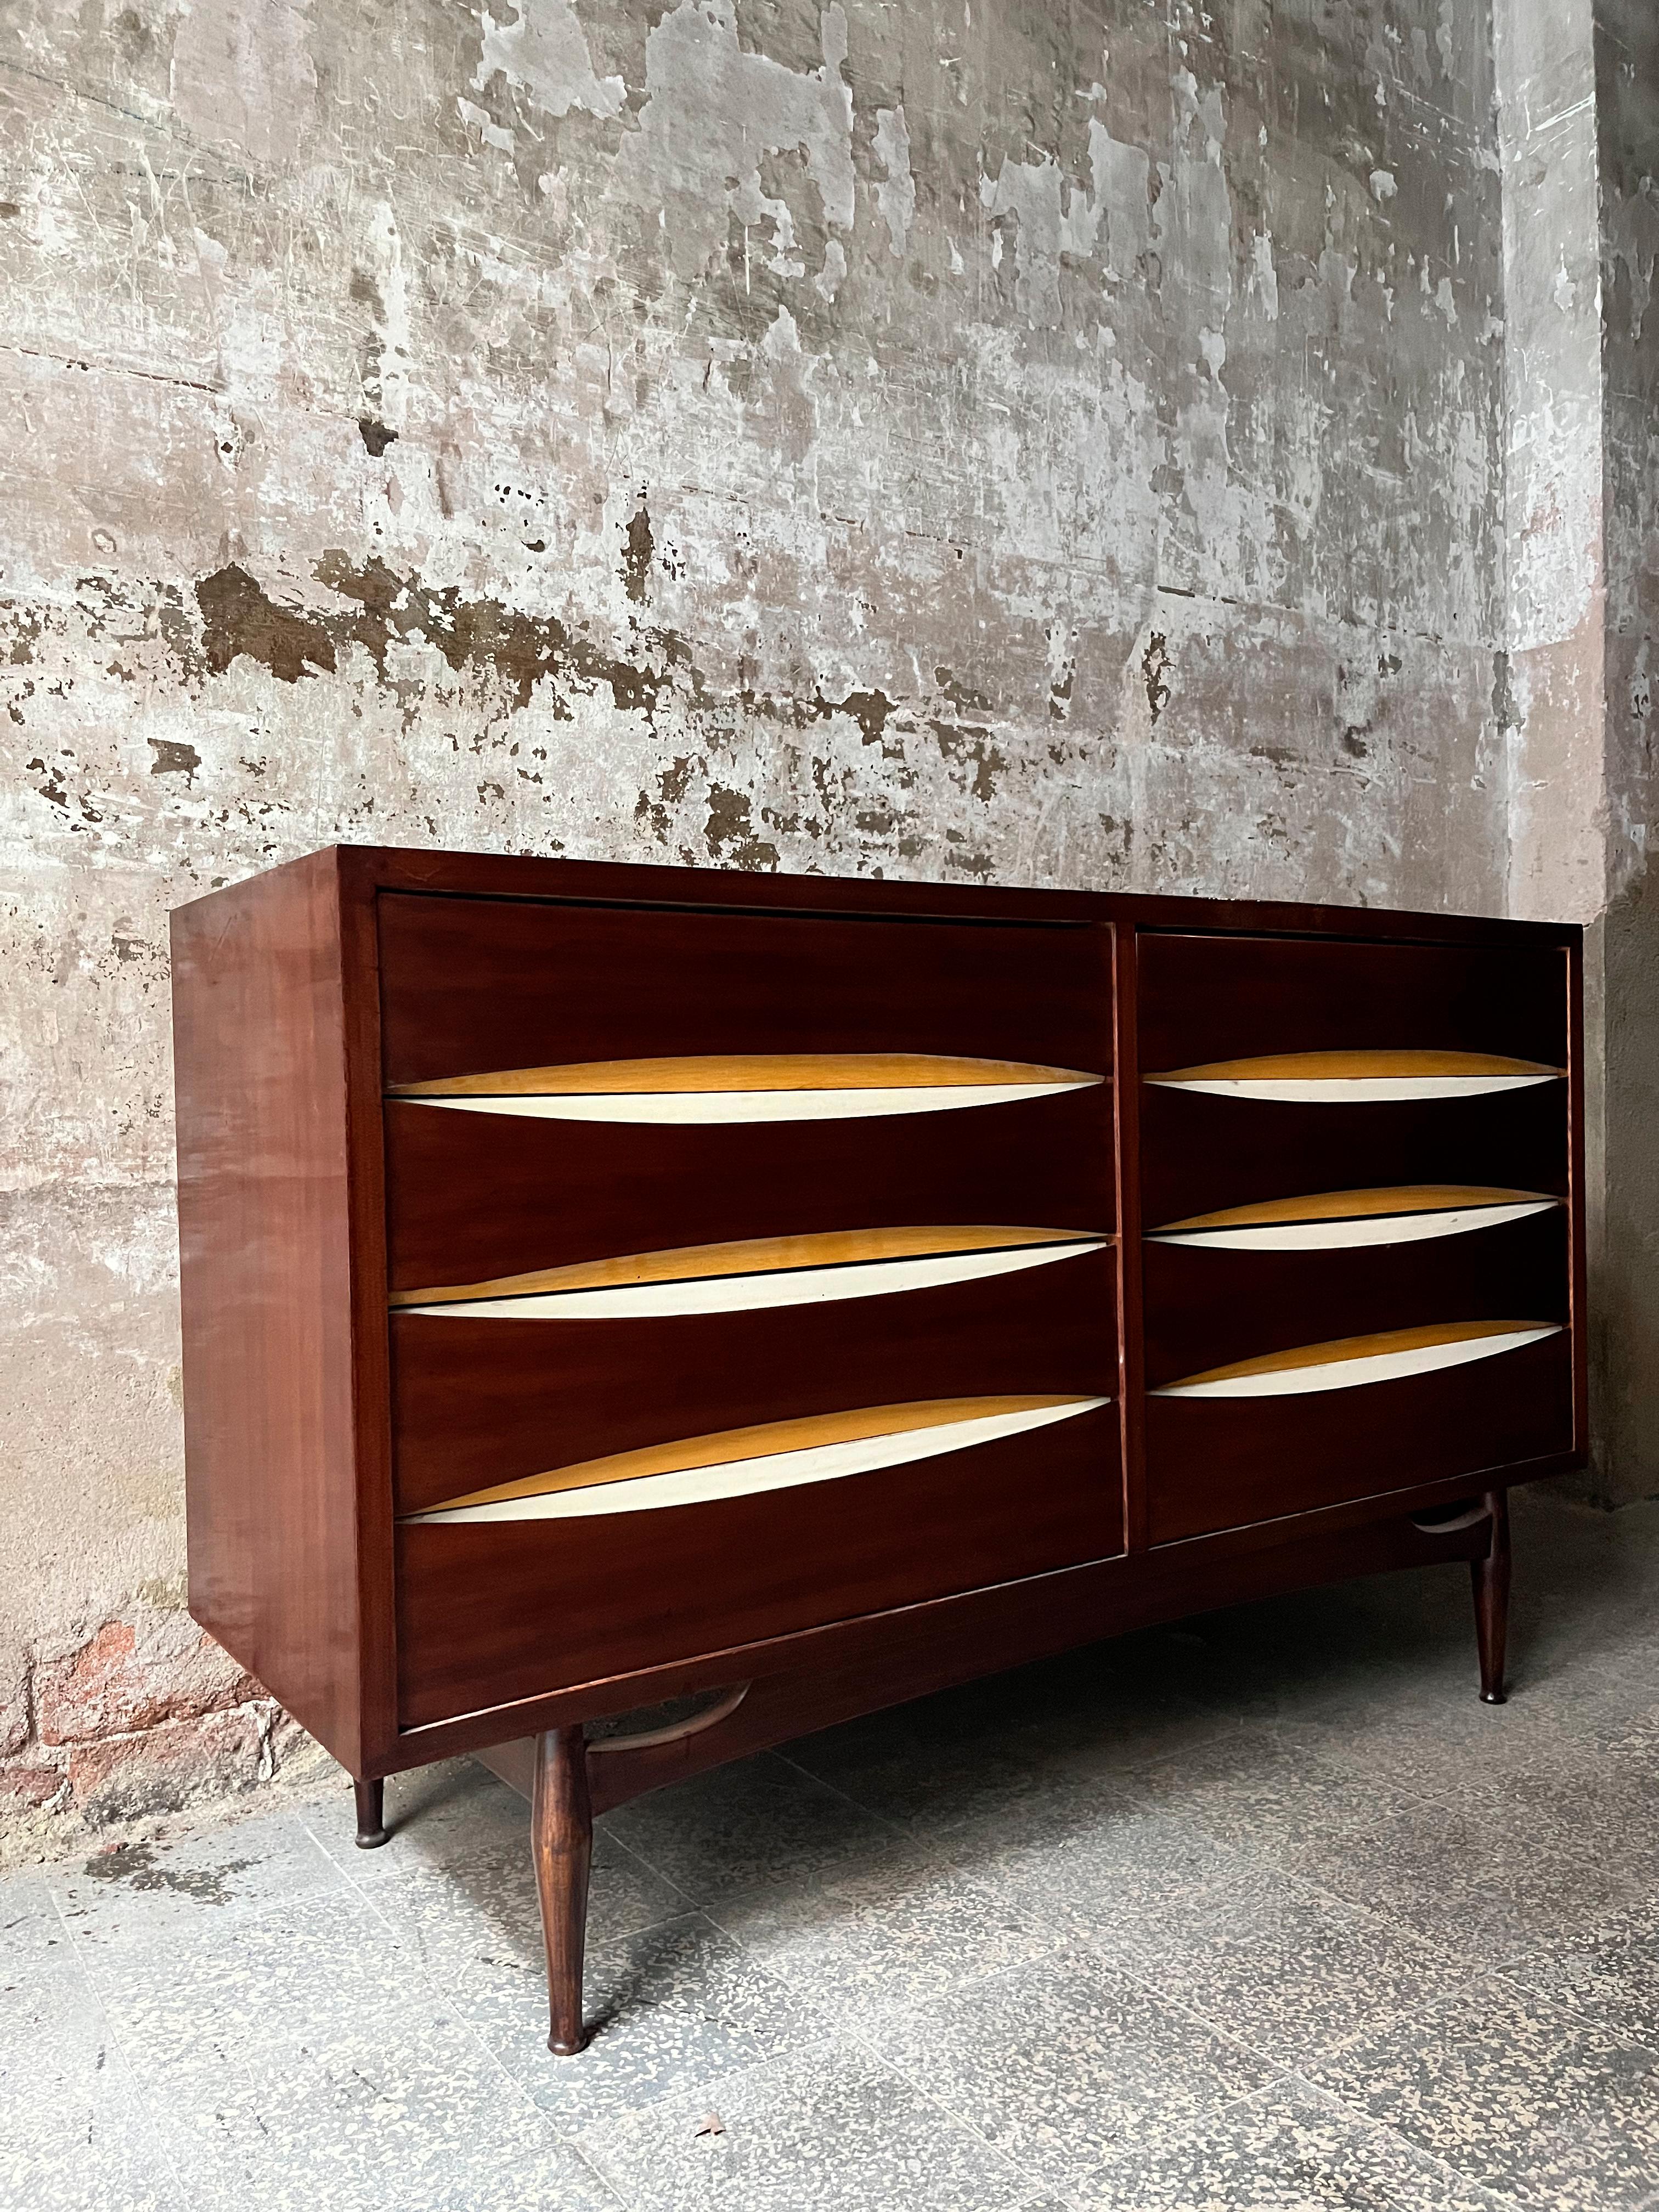 Discover the timeless elegance of the cabinet attributed to Arne Vodder, a true gem of 1960s design. This exquisite piece of furniture captures the essence and distinctive finishes that characterize the creations of the renowned Danish